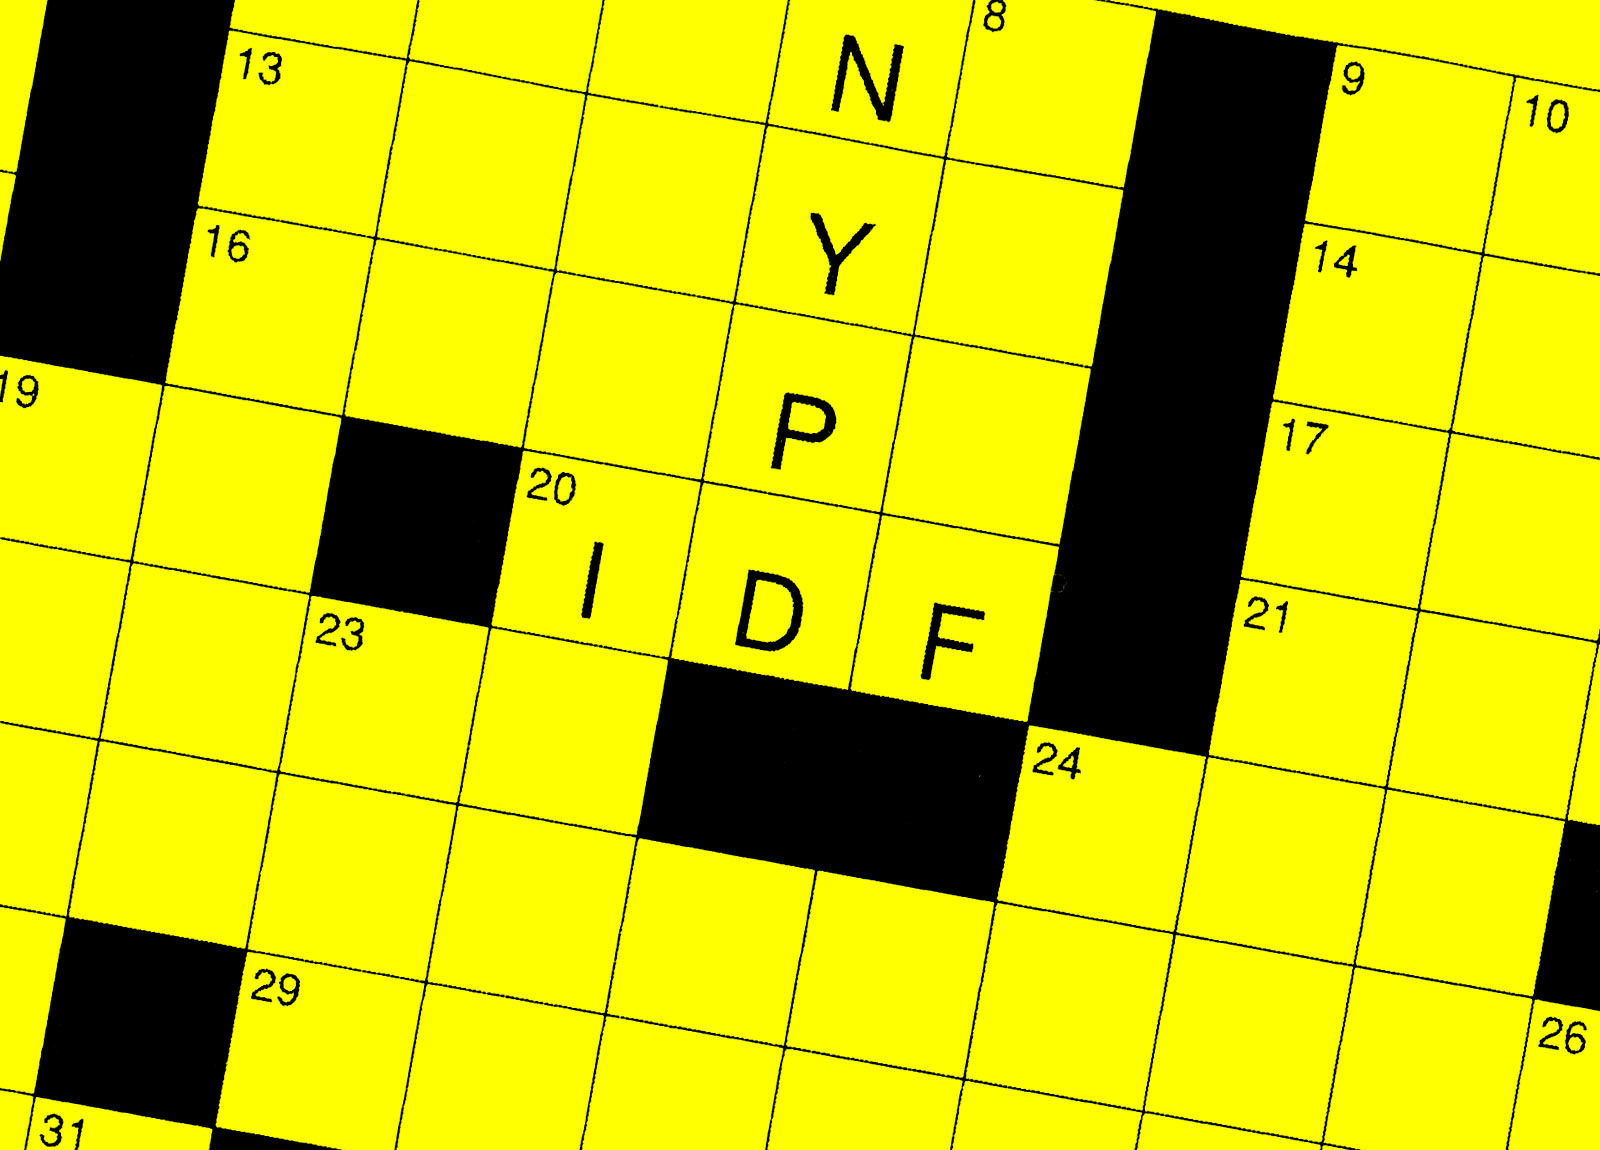 https://newyorkwarcrimes.com/media/pages/crossword-puzzle-may-9-2024/89a6834e66-1714943143/nywc-crossword-20240509.jpg